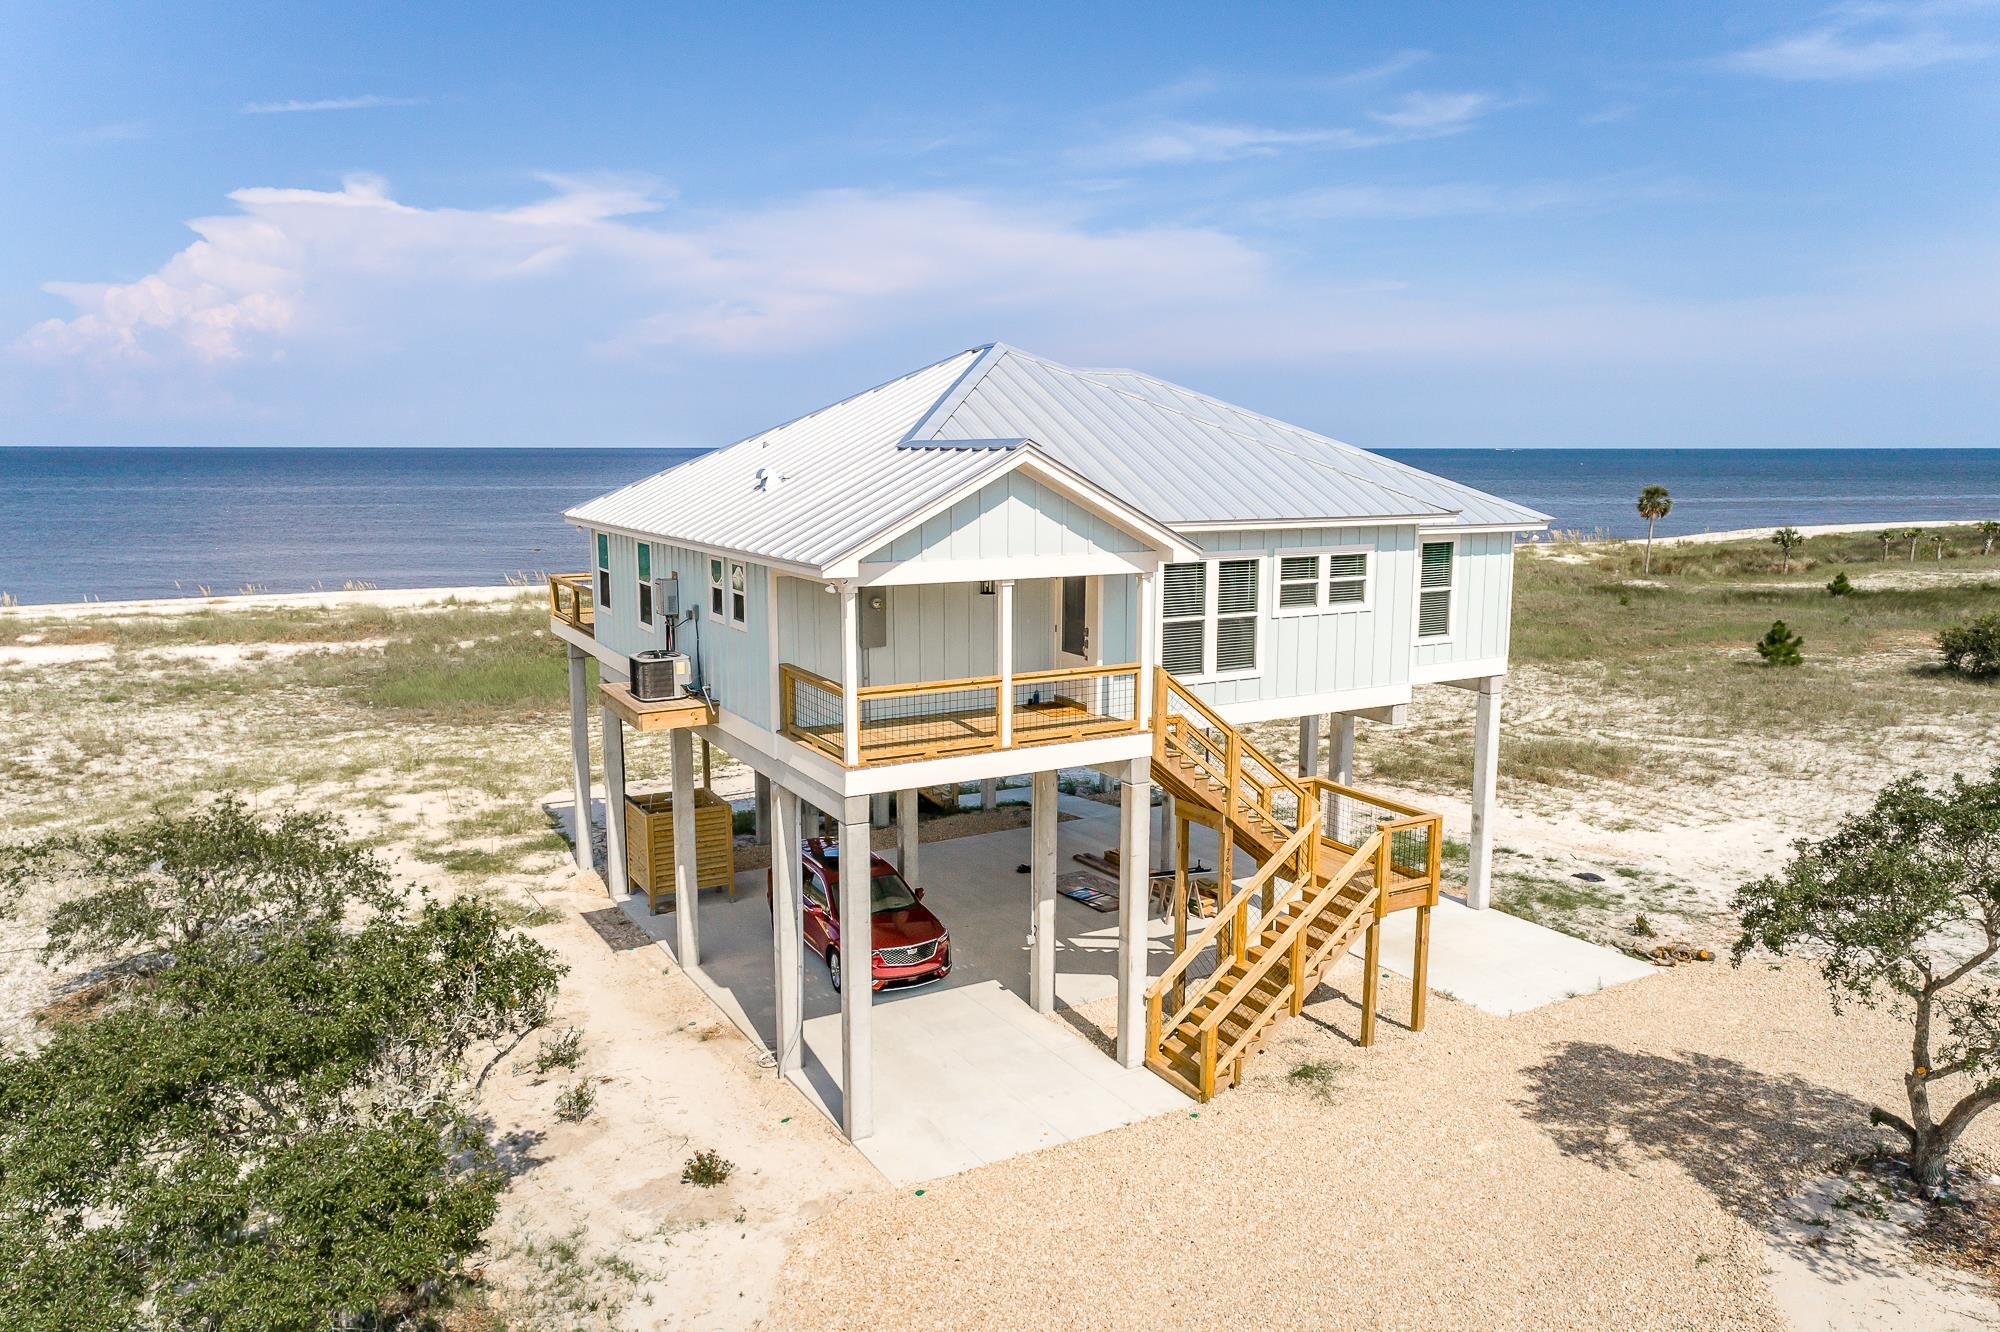 746 Bald Point Road,ALLIGATOR POINT,Florida 32346,3 Bedrooms Bedrooms,2 BathroomsBathrooms,Detached single family,746 Bald Point Road,362165